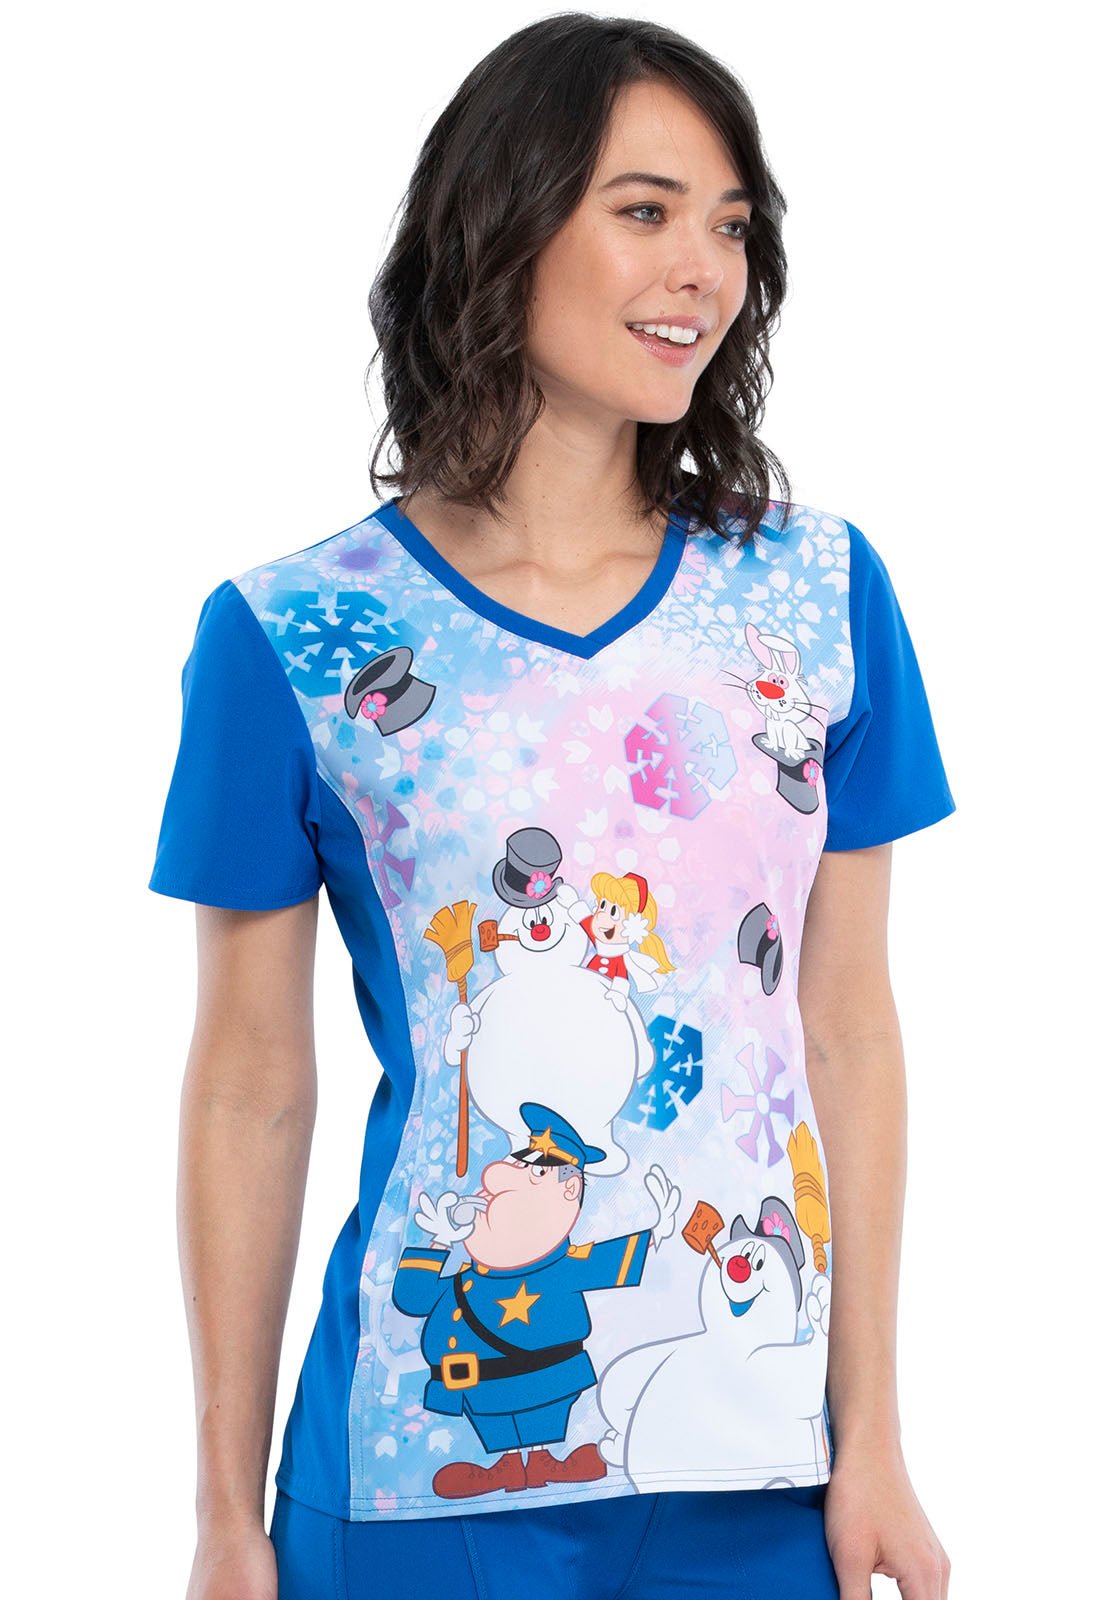 Frosty The Snowman Tooniforms Licensed V Neck Scrub Top TF627 FRLN - Scrubs Select